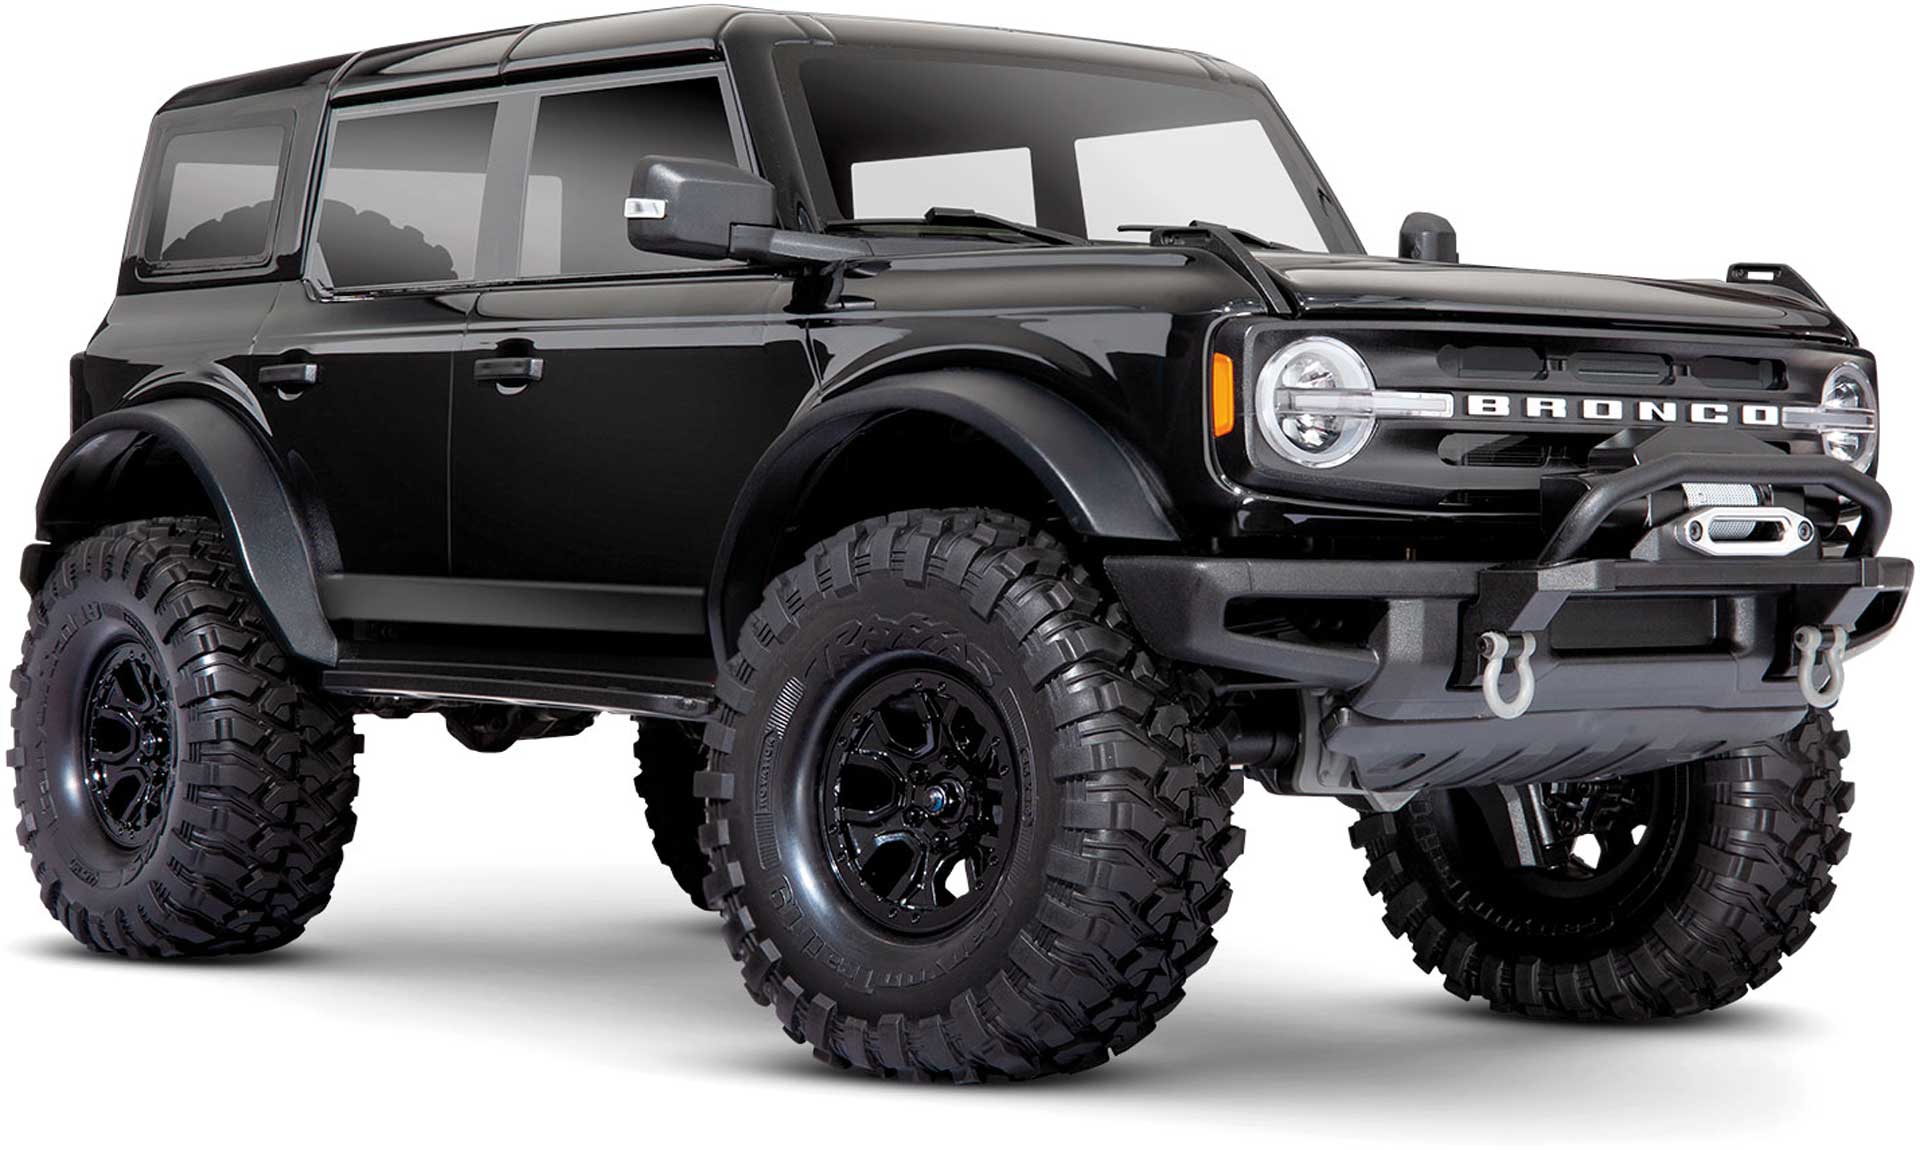 TRAXXAS TRX-4 2021 FORD BRONCO noir RTR Sans Accu /Chargeur 1/10 4WD SCALE CRAWLER BRUSHED